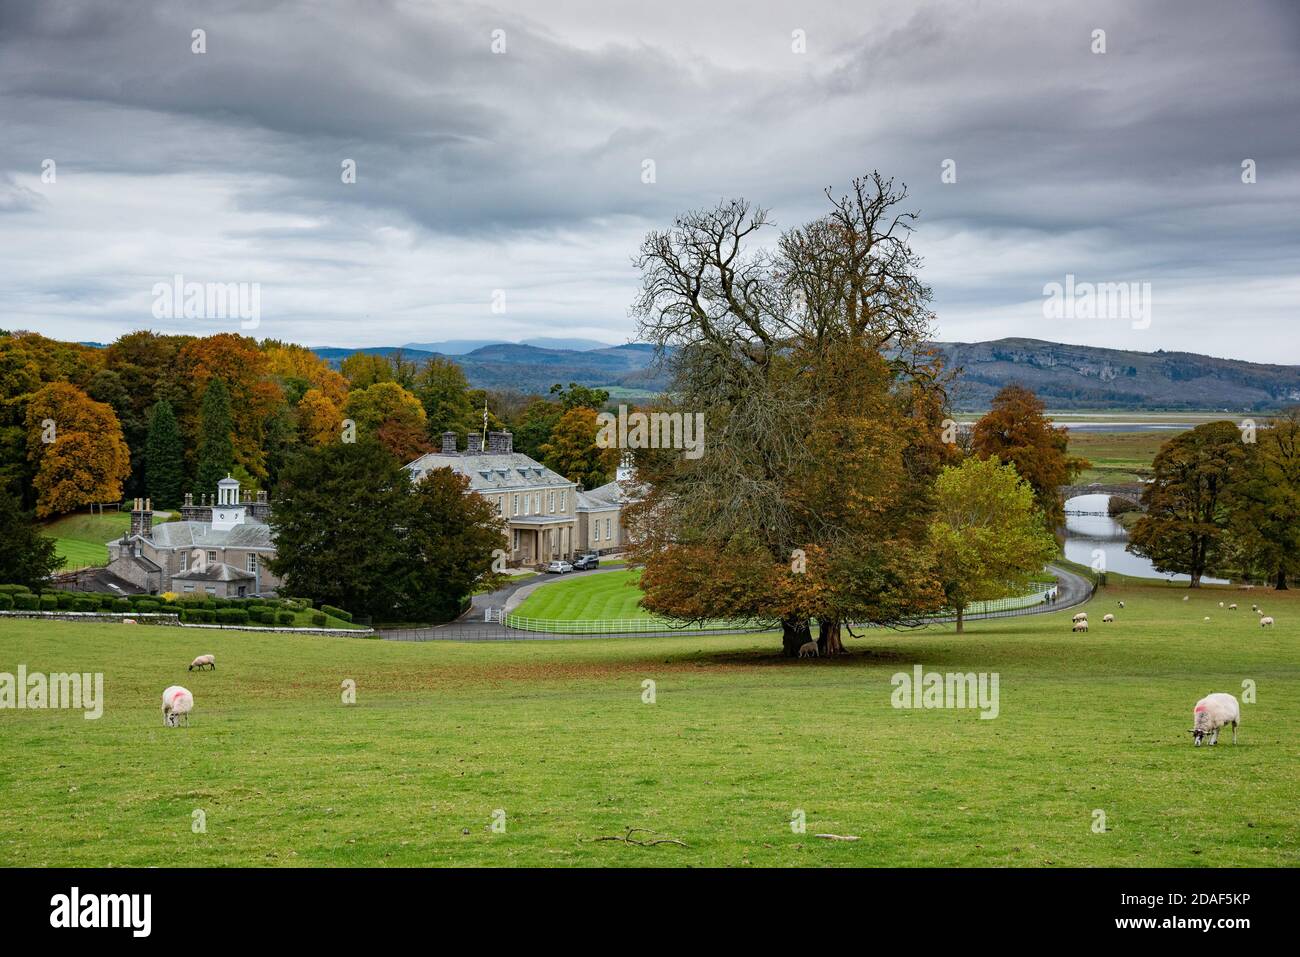 View of Dallam Tower in Autumn from the deer park, Milnthorpe, Cumbria. UK Stock Photo